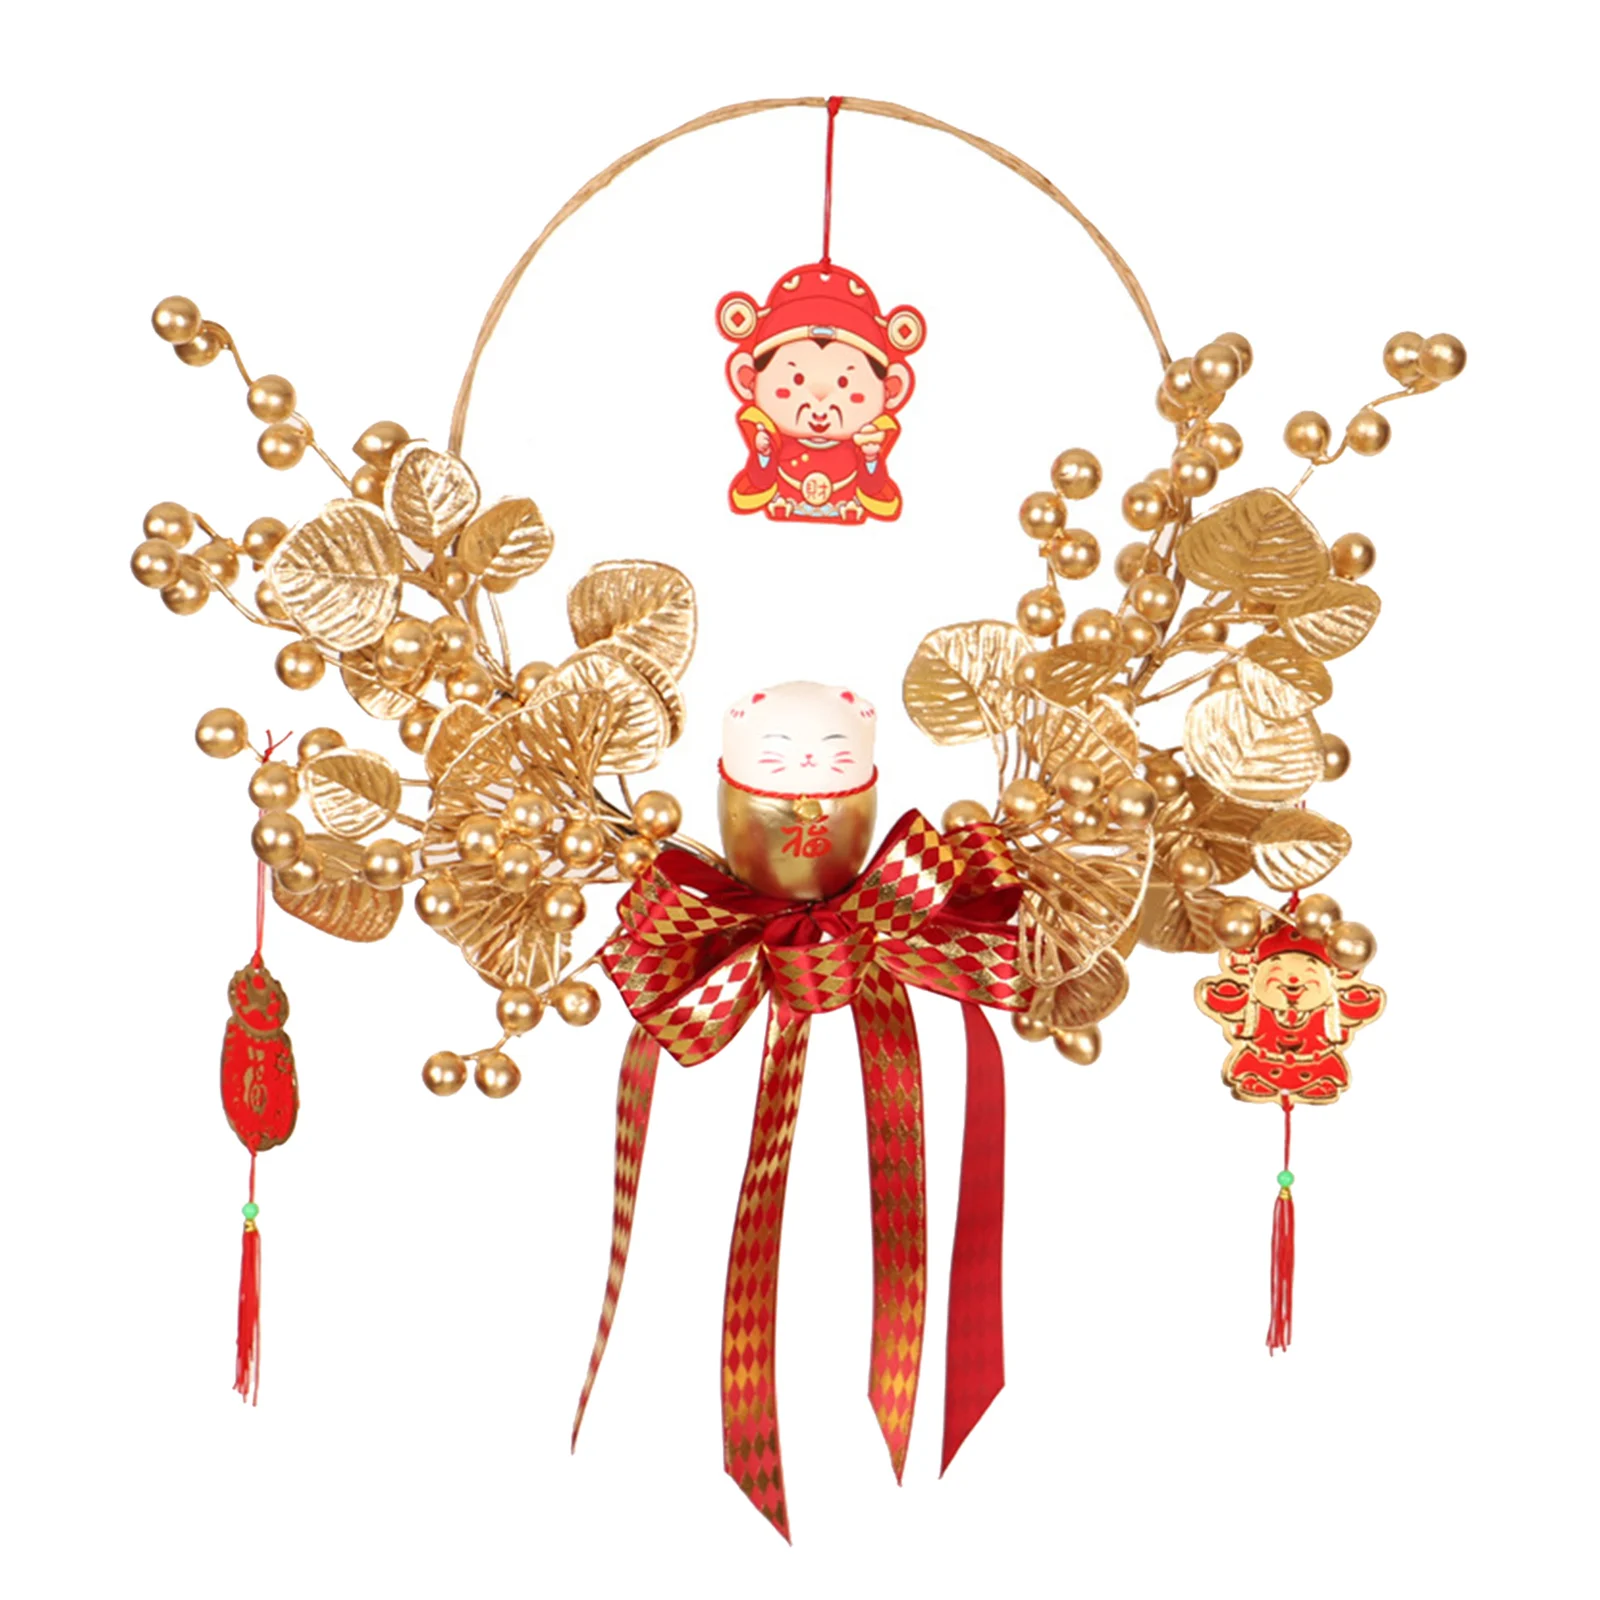 Chinese New Year Decoration Ornamental Berries Wheat Wreath for Celebration Holiday